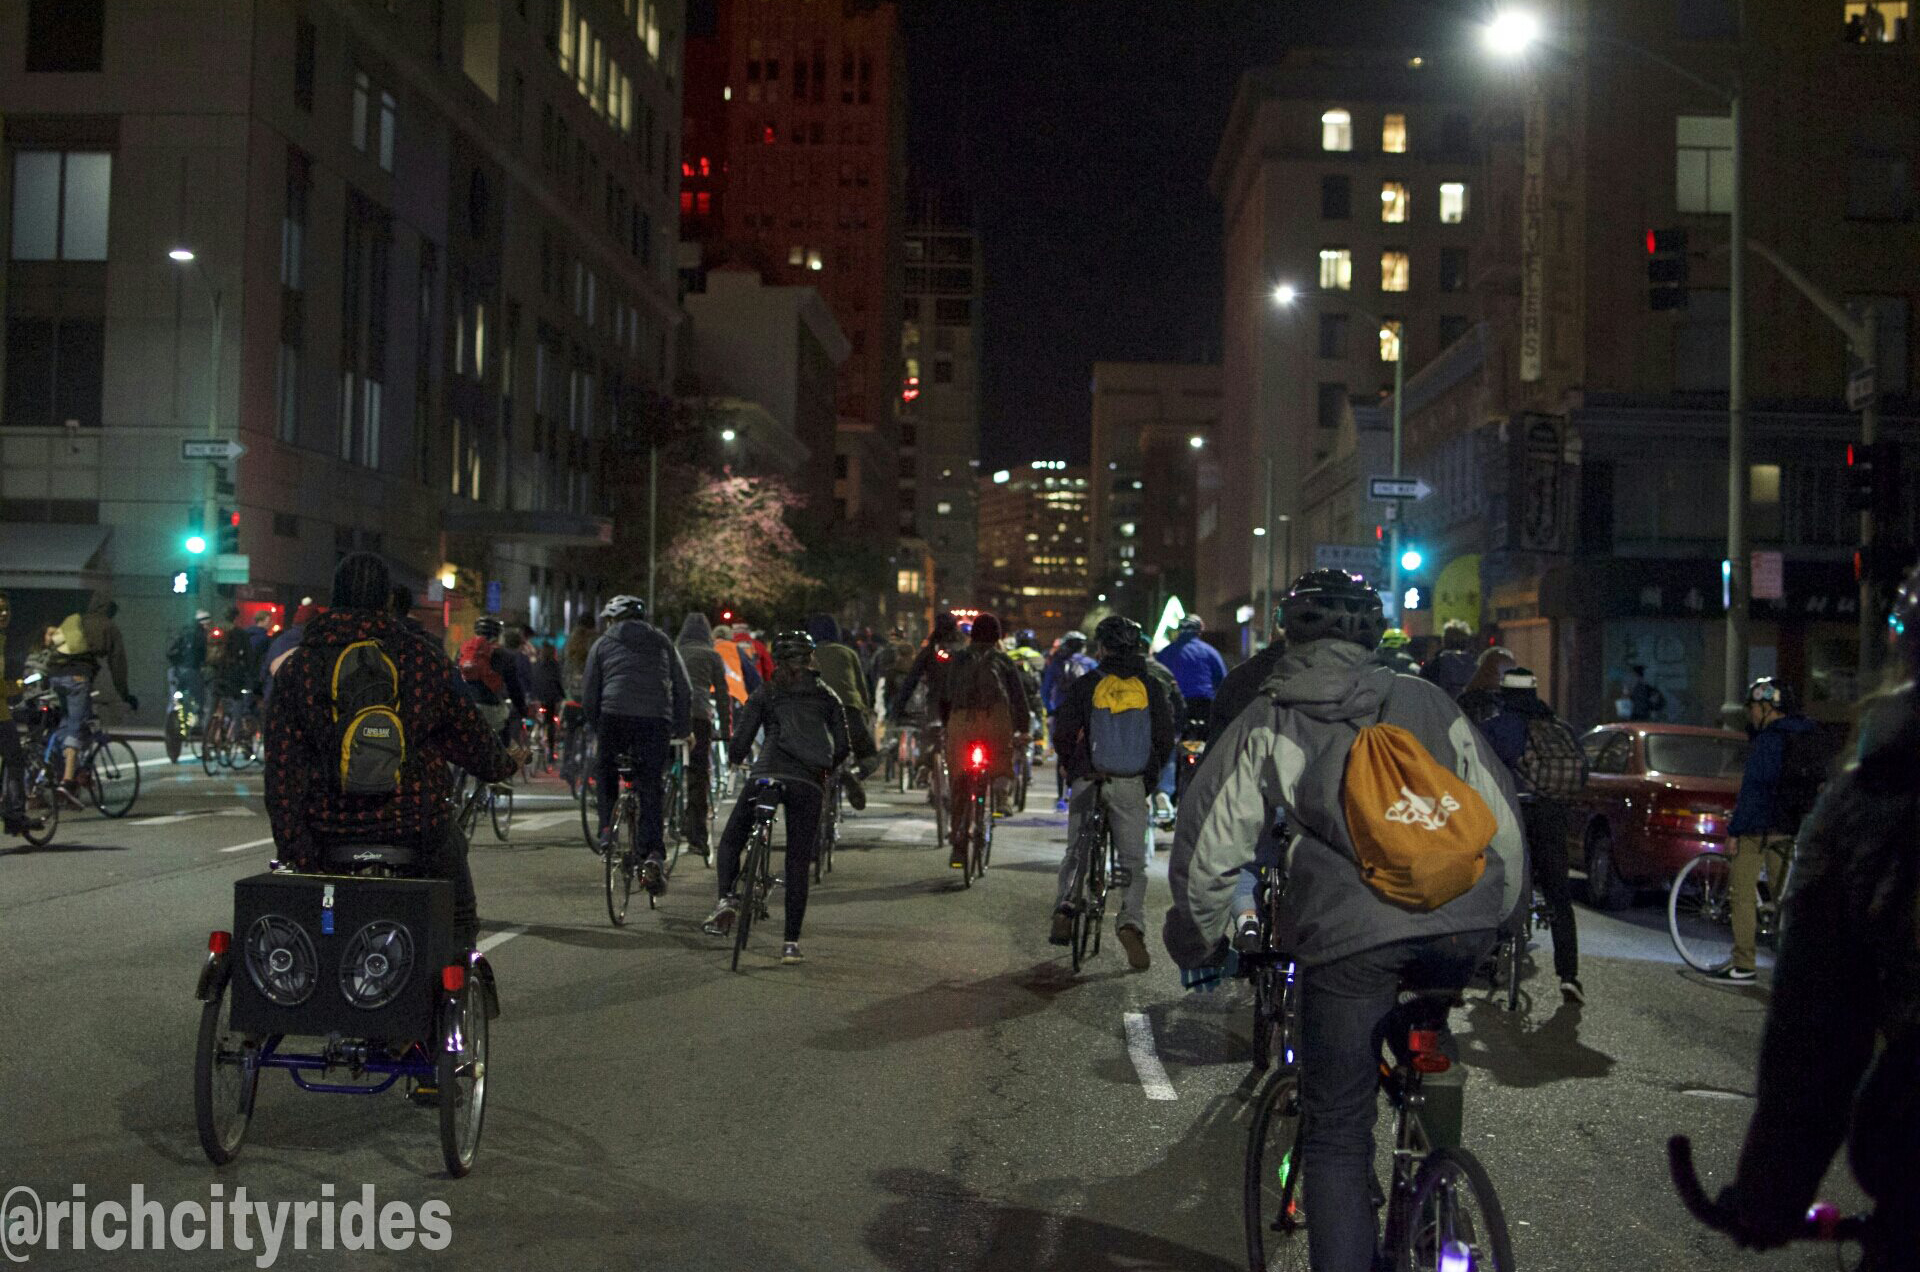 East Bay Bike Party rides through Oakland Chinatown. Photo courtesy Rich City Rides